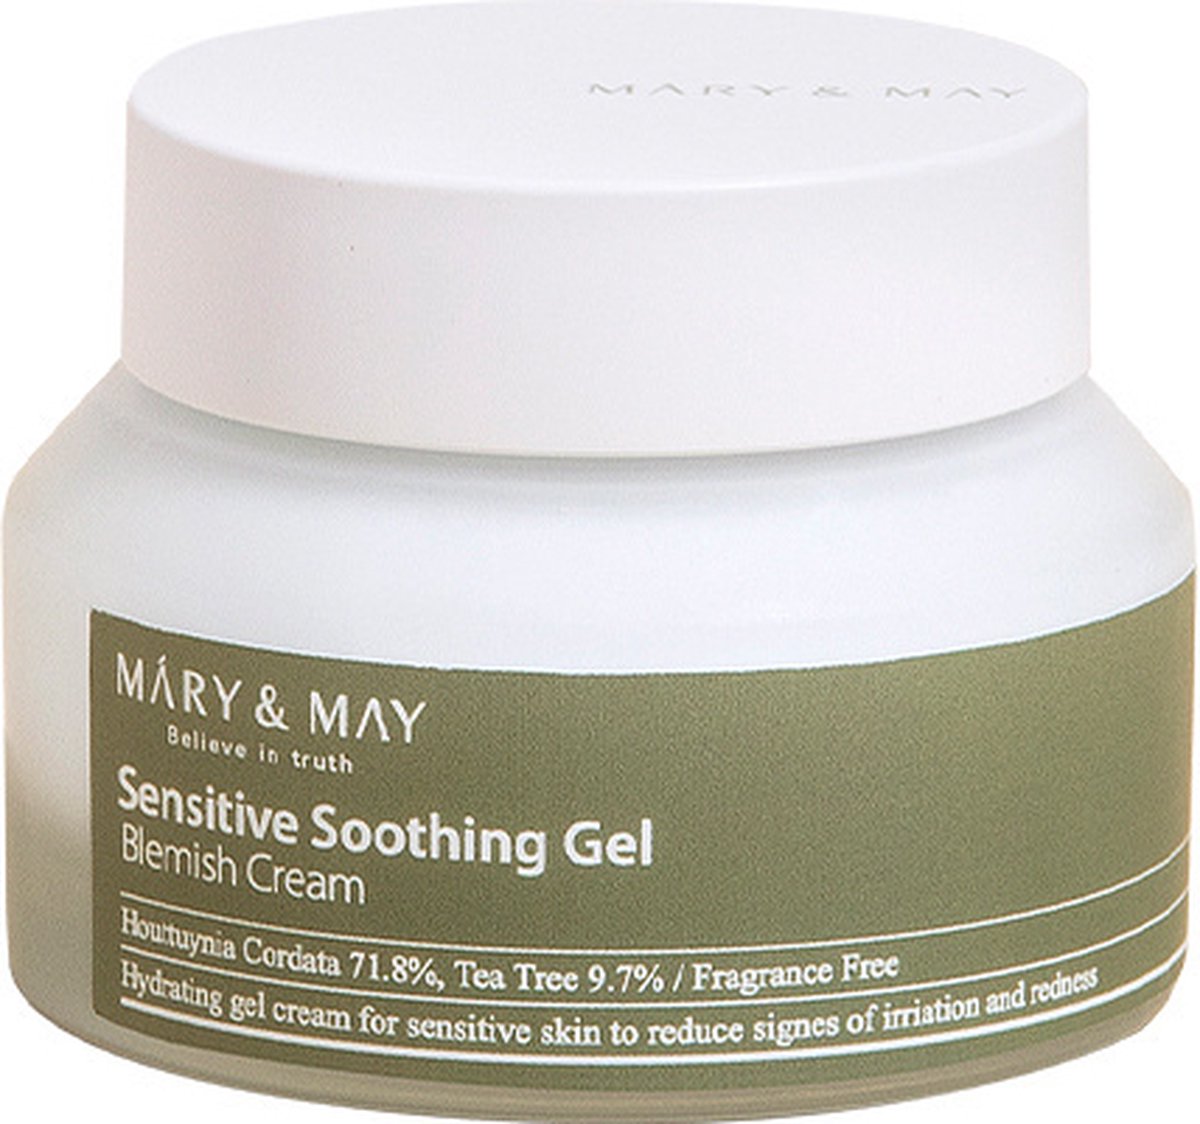 Mary & May Sensitive Soothing Gel Blemish Cream 70 g 70 g